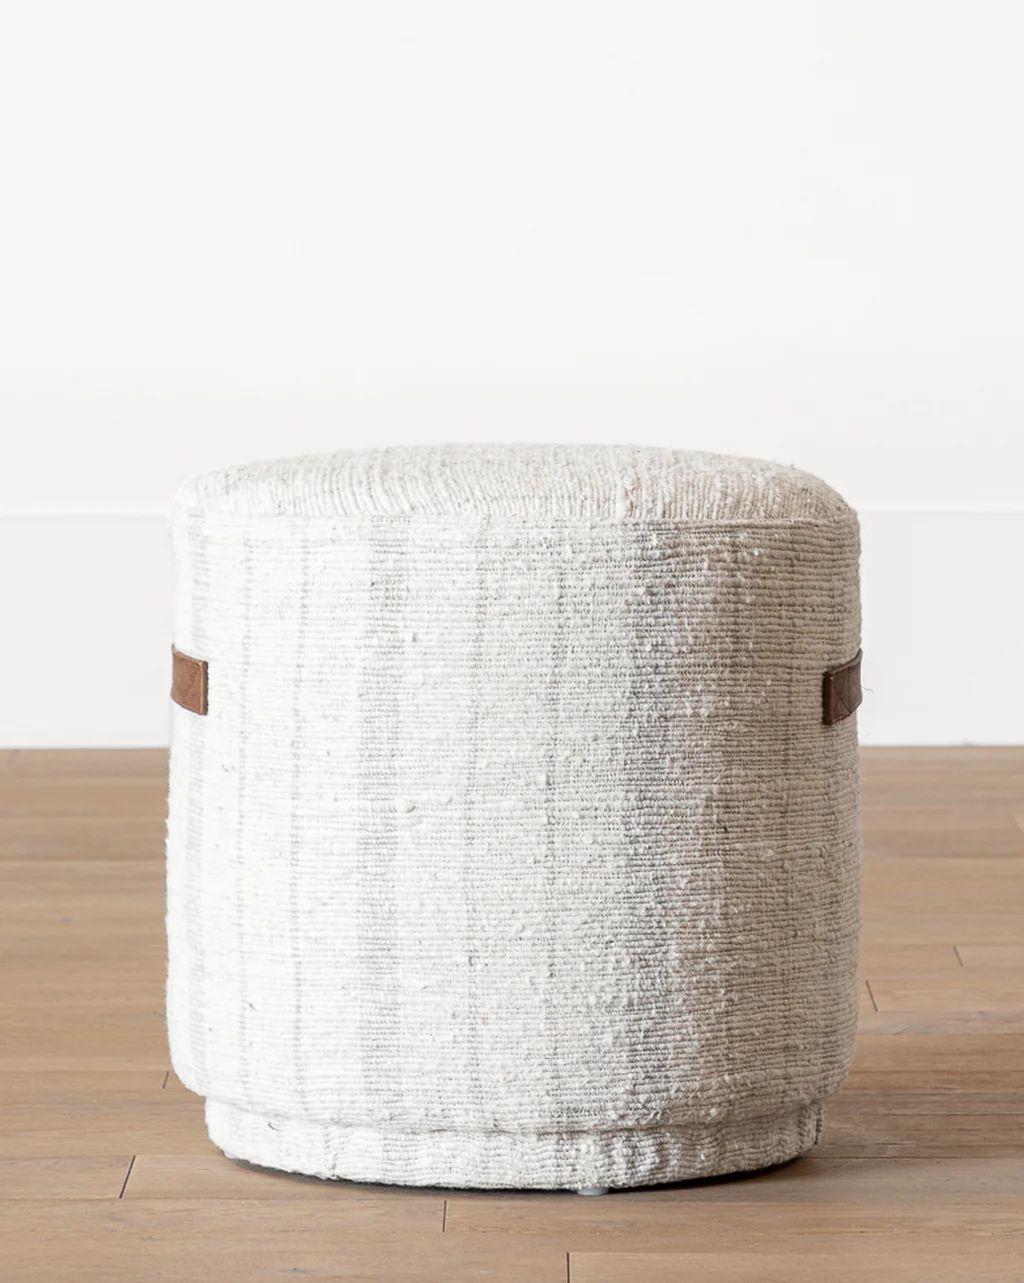 Coming Soon: McKay Small Round Ottoman | McGee & Co.